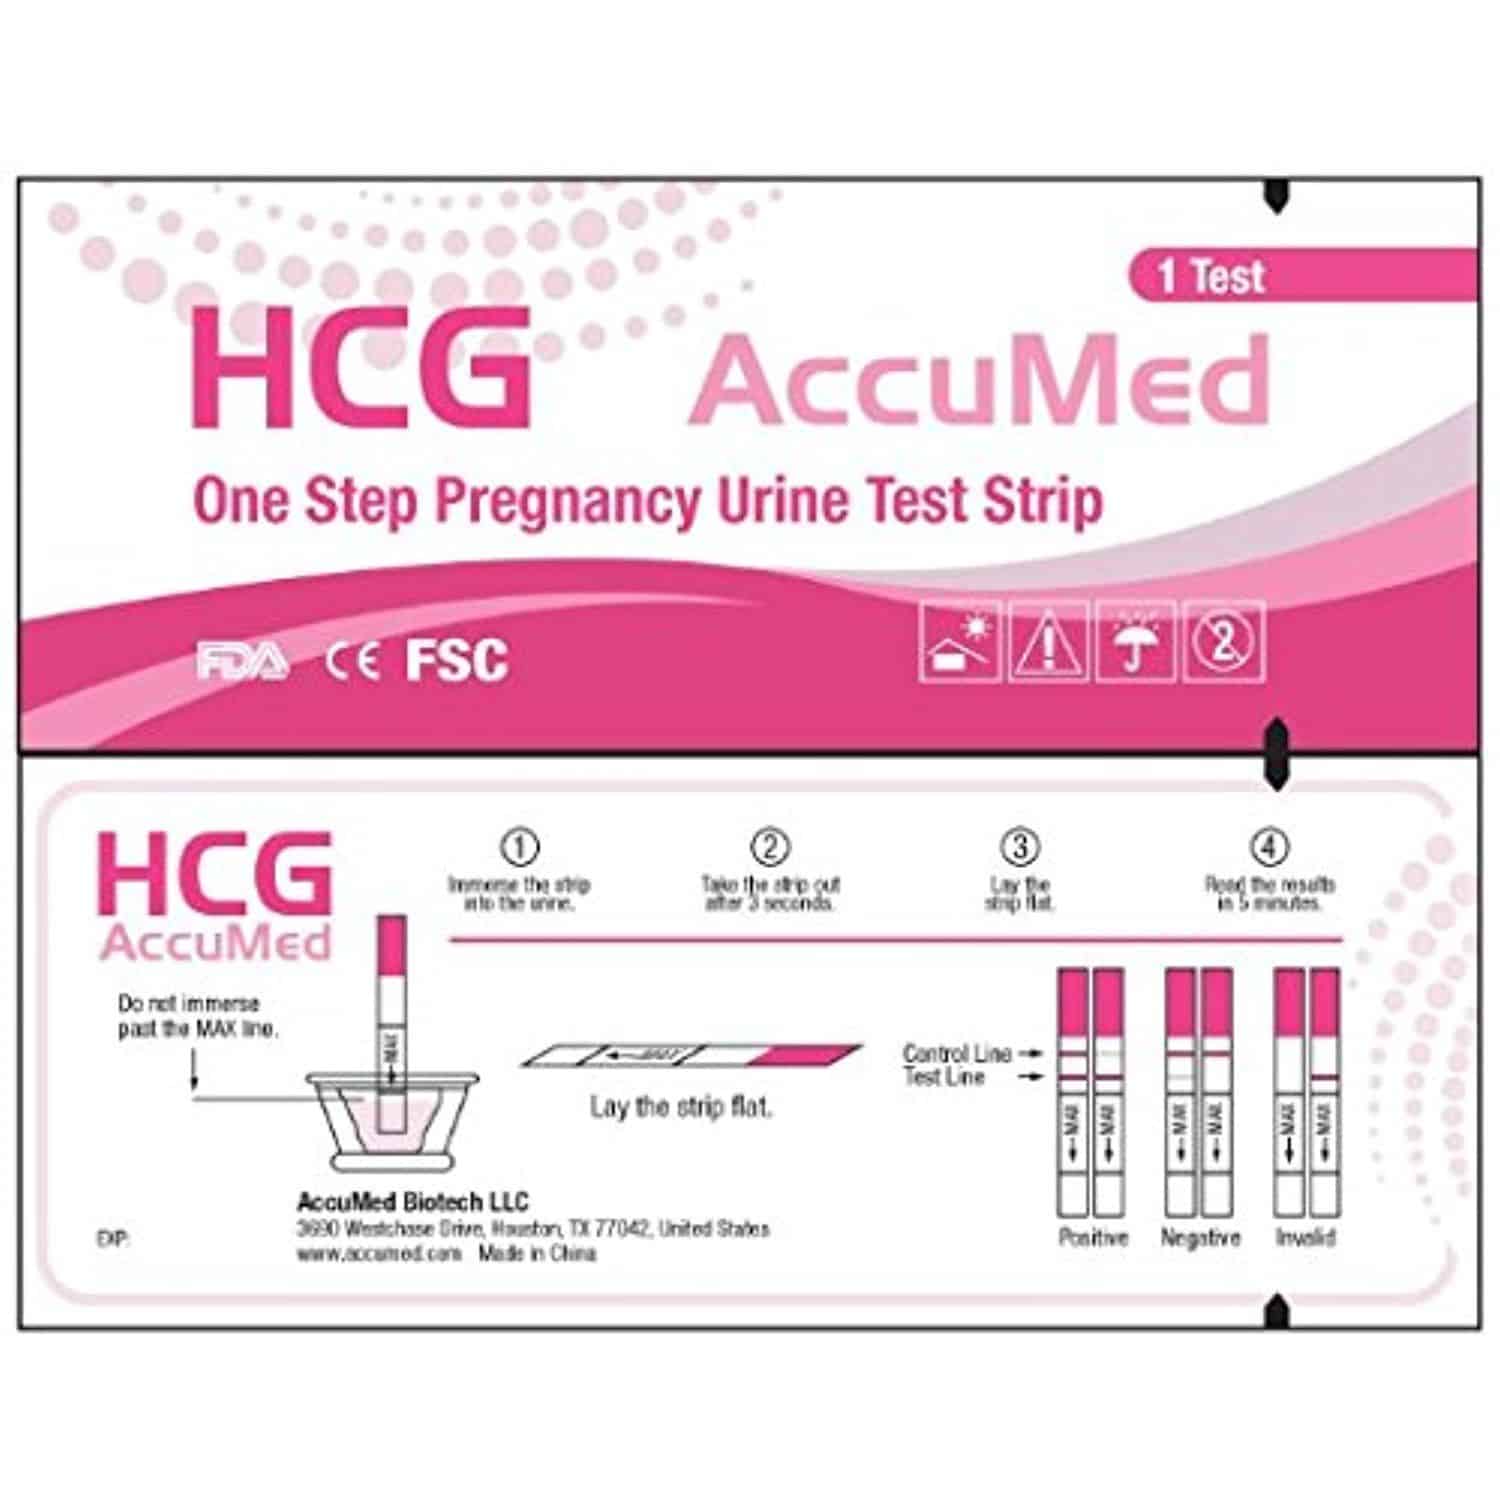 How To Test Hcg Levels At Home